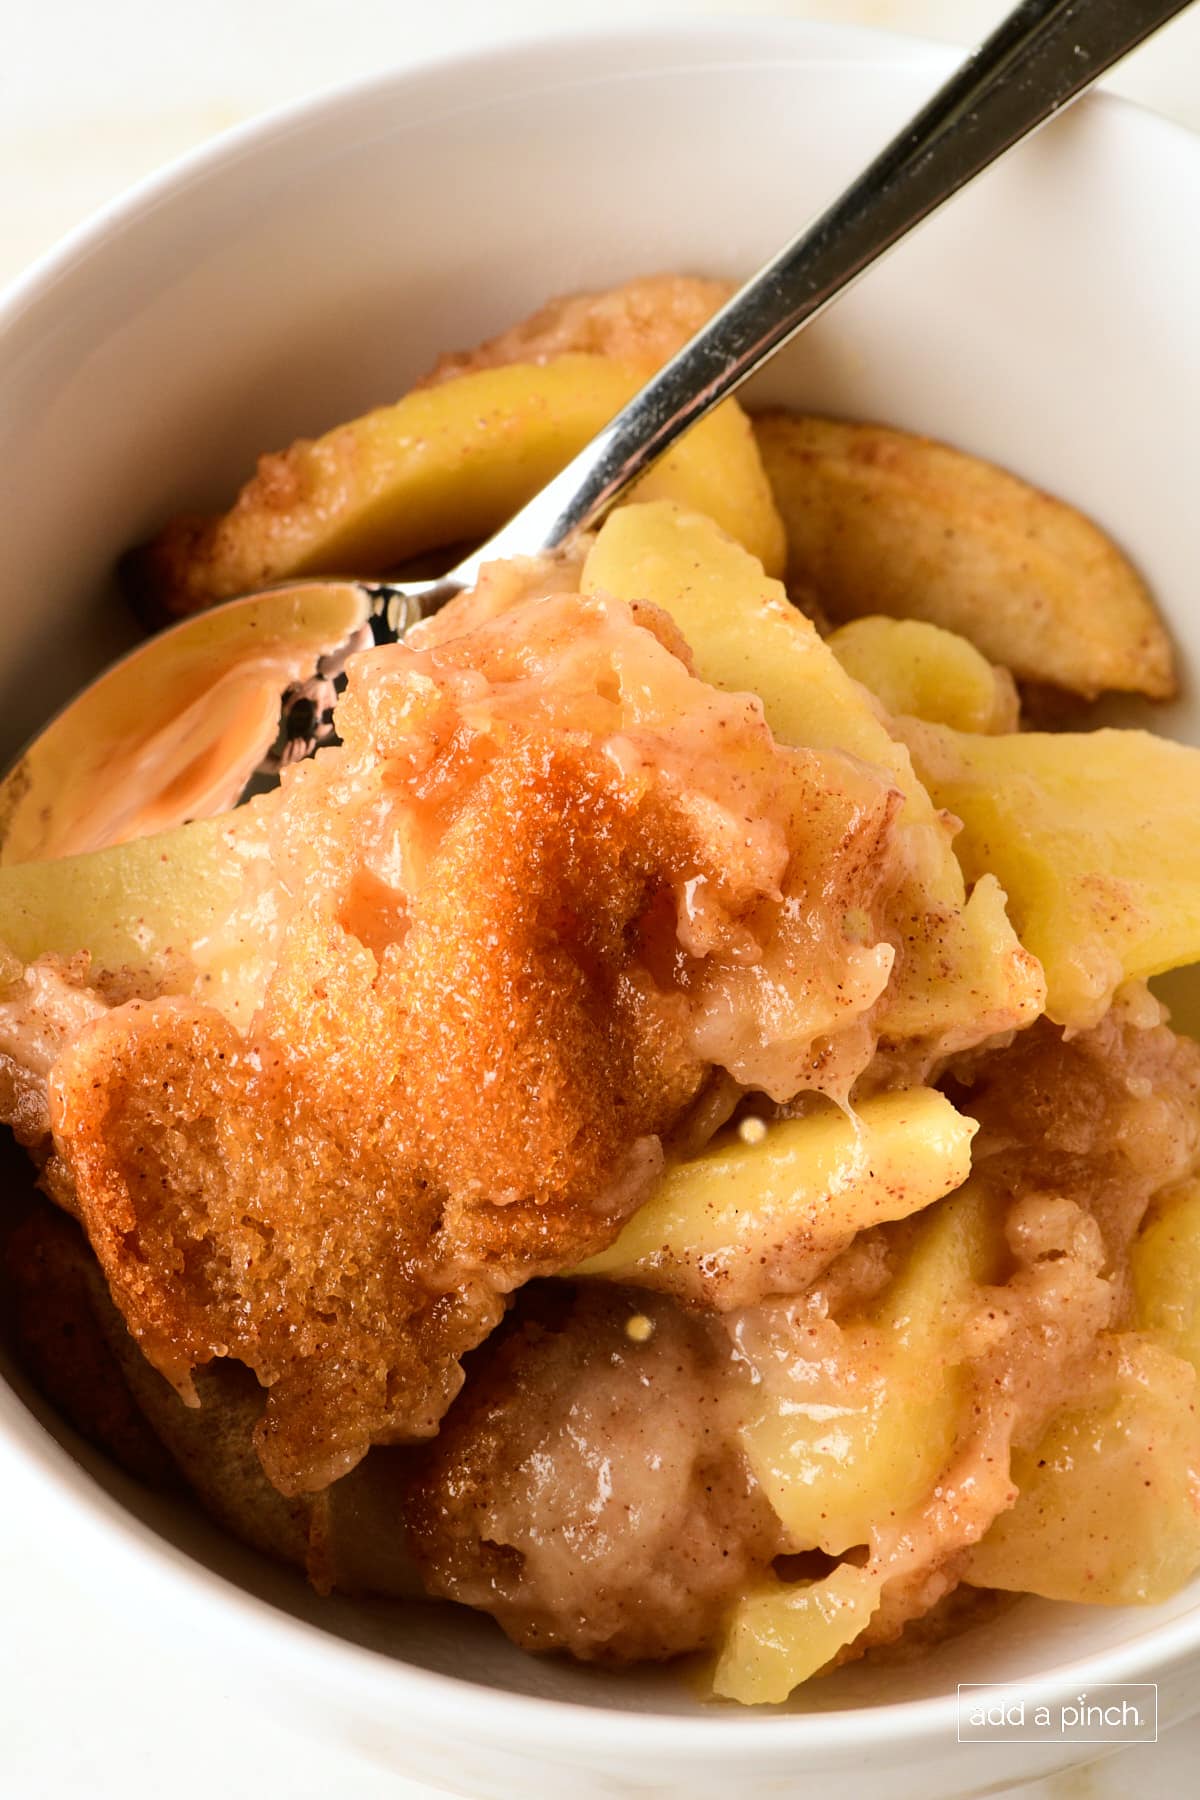 Apple cobbler in a white bowl with a spoon.